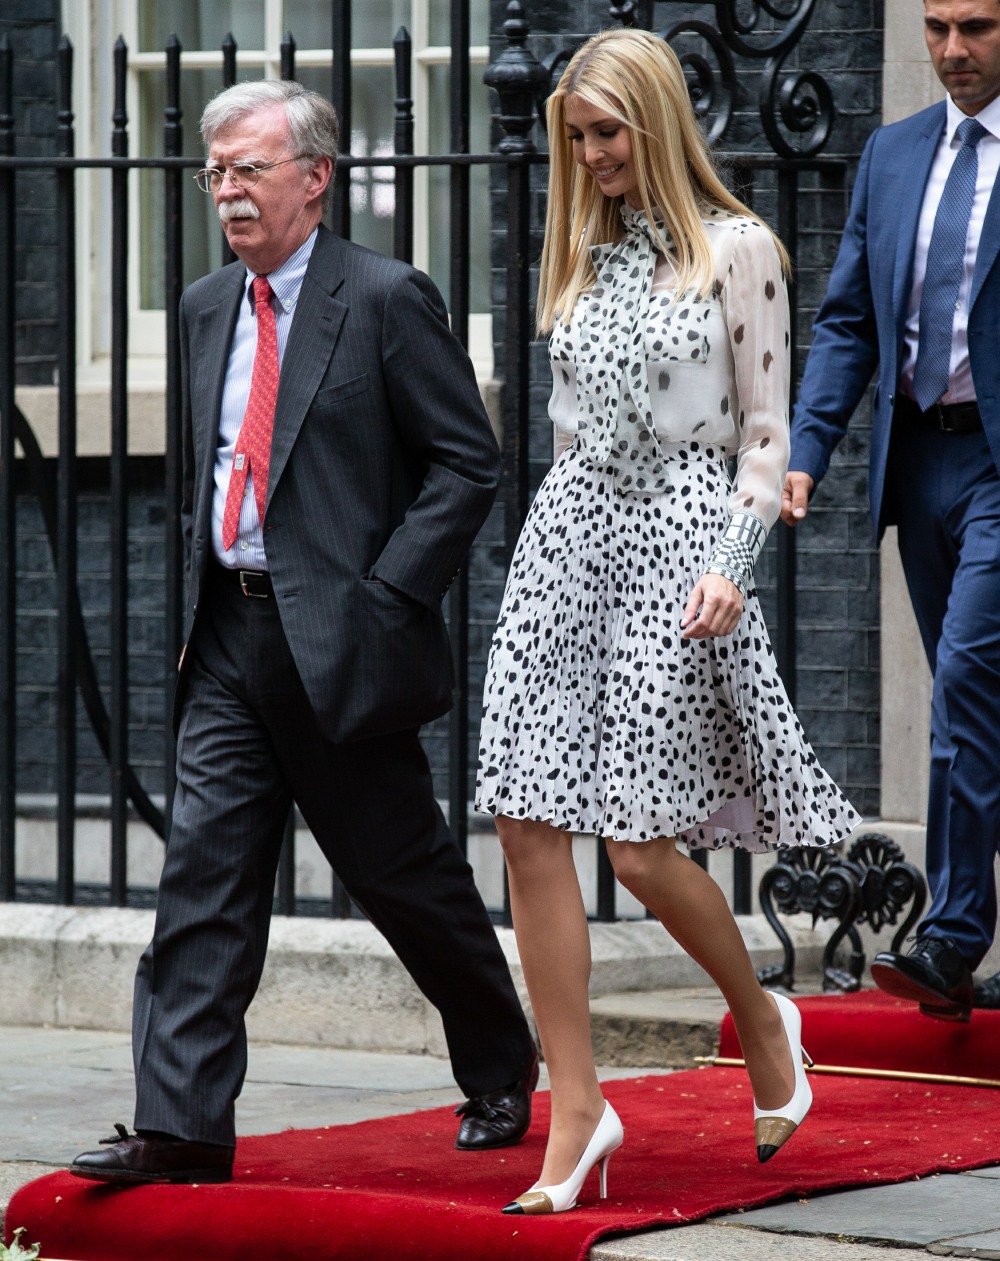 US President Donald Trump and First Lady Melania Trump Arrival at Downing Street